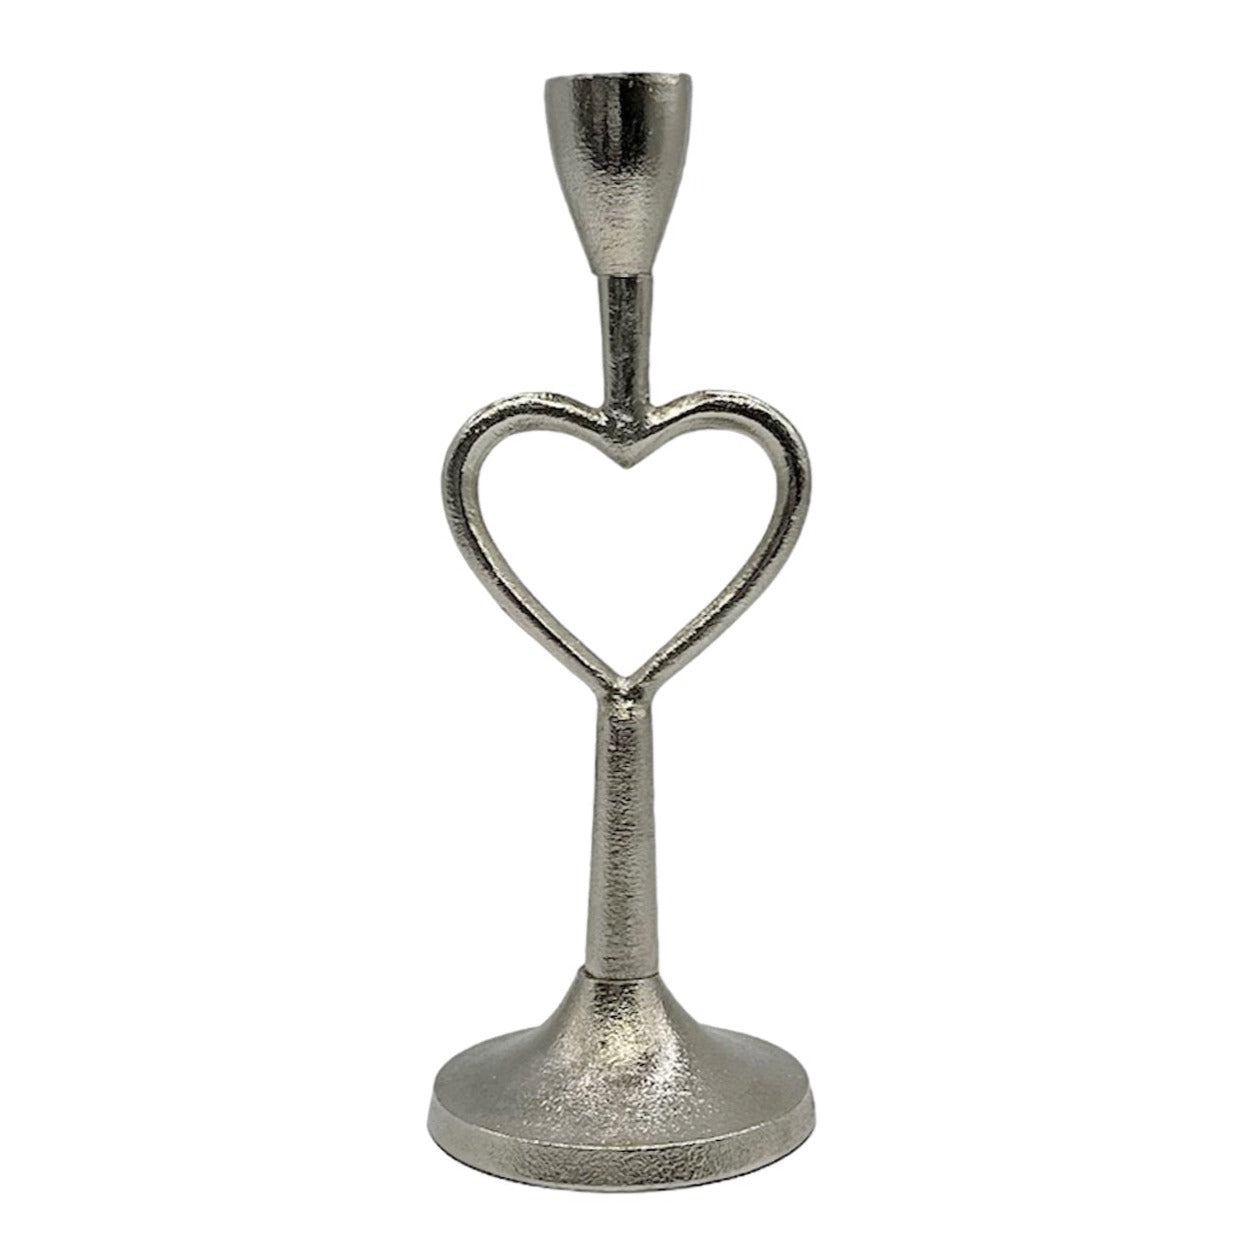 METAL HEART CANDLE STICK